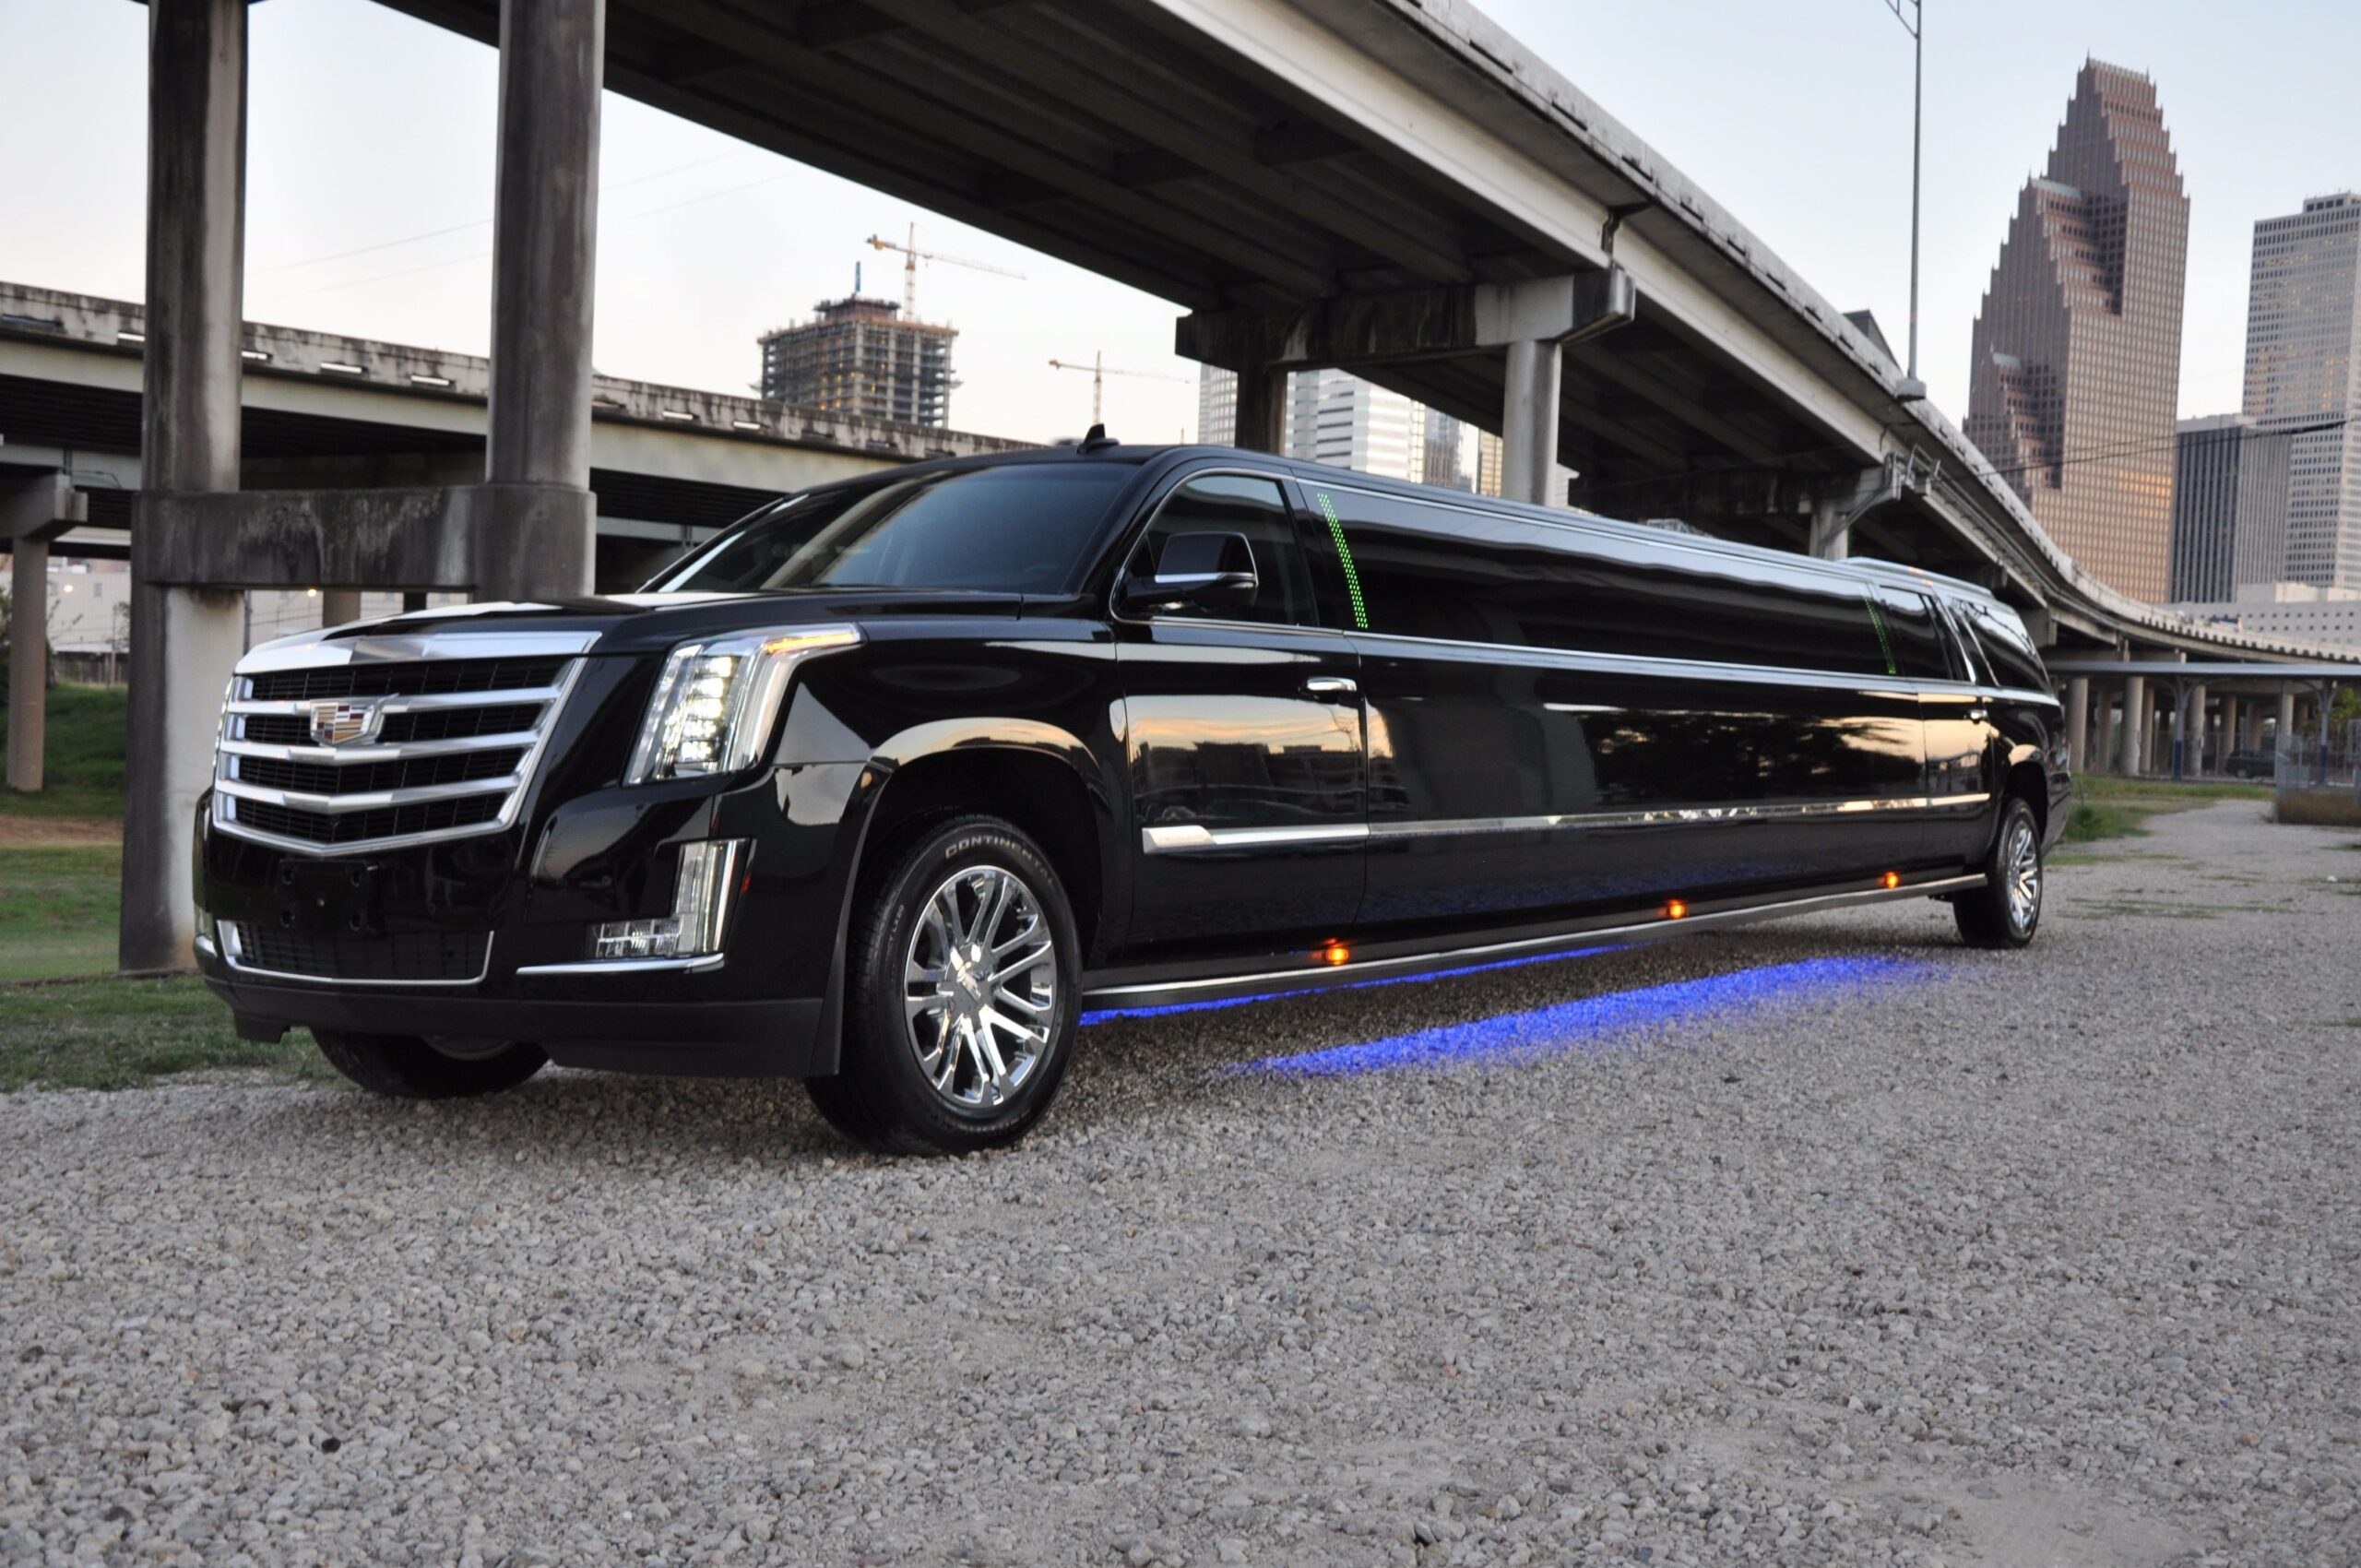 Limo Service in Houston